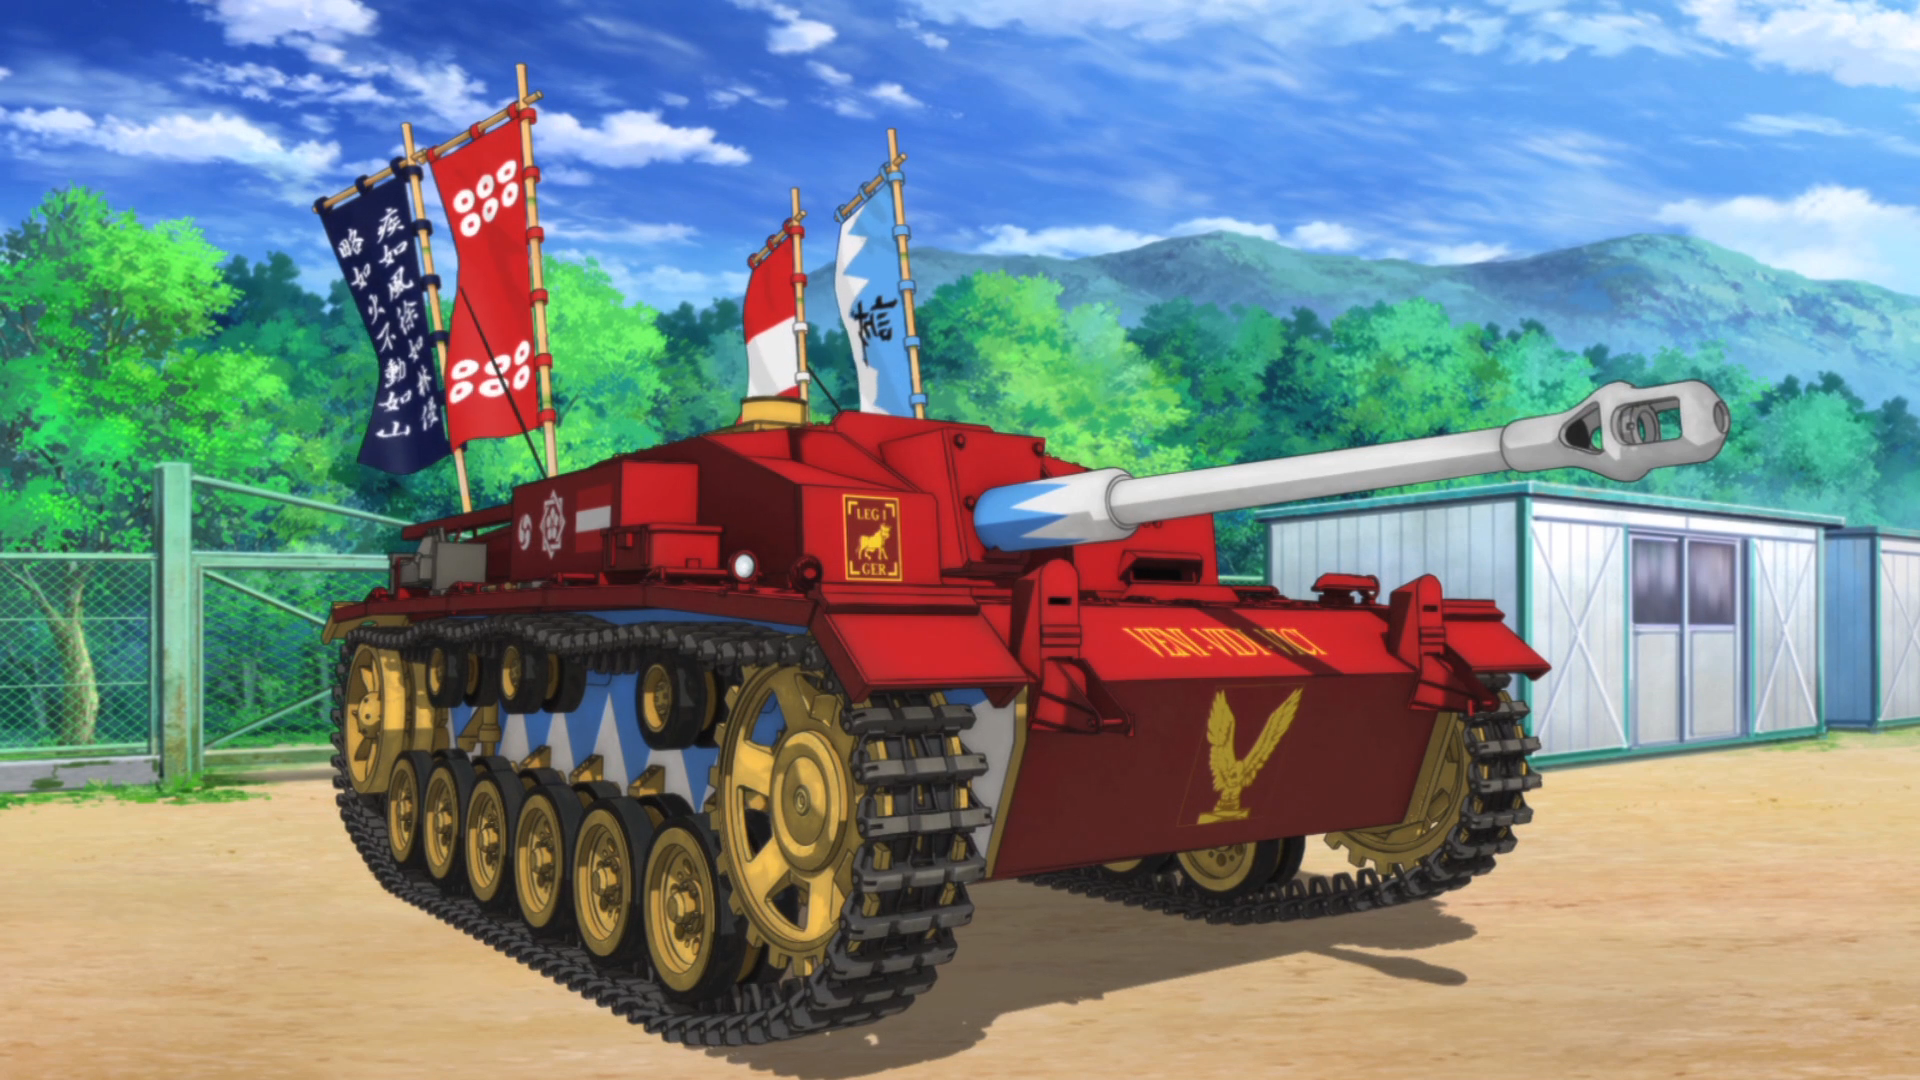 Girls-und-Panzer-Hippo-Team-Tank-and-Banners-002.png